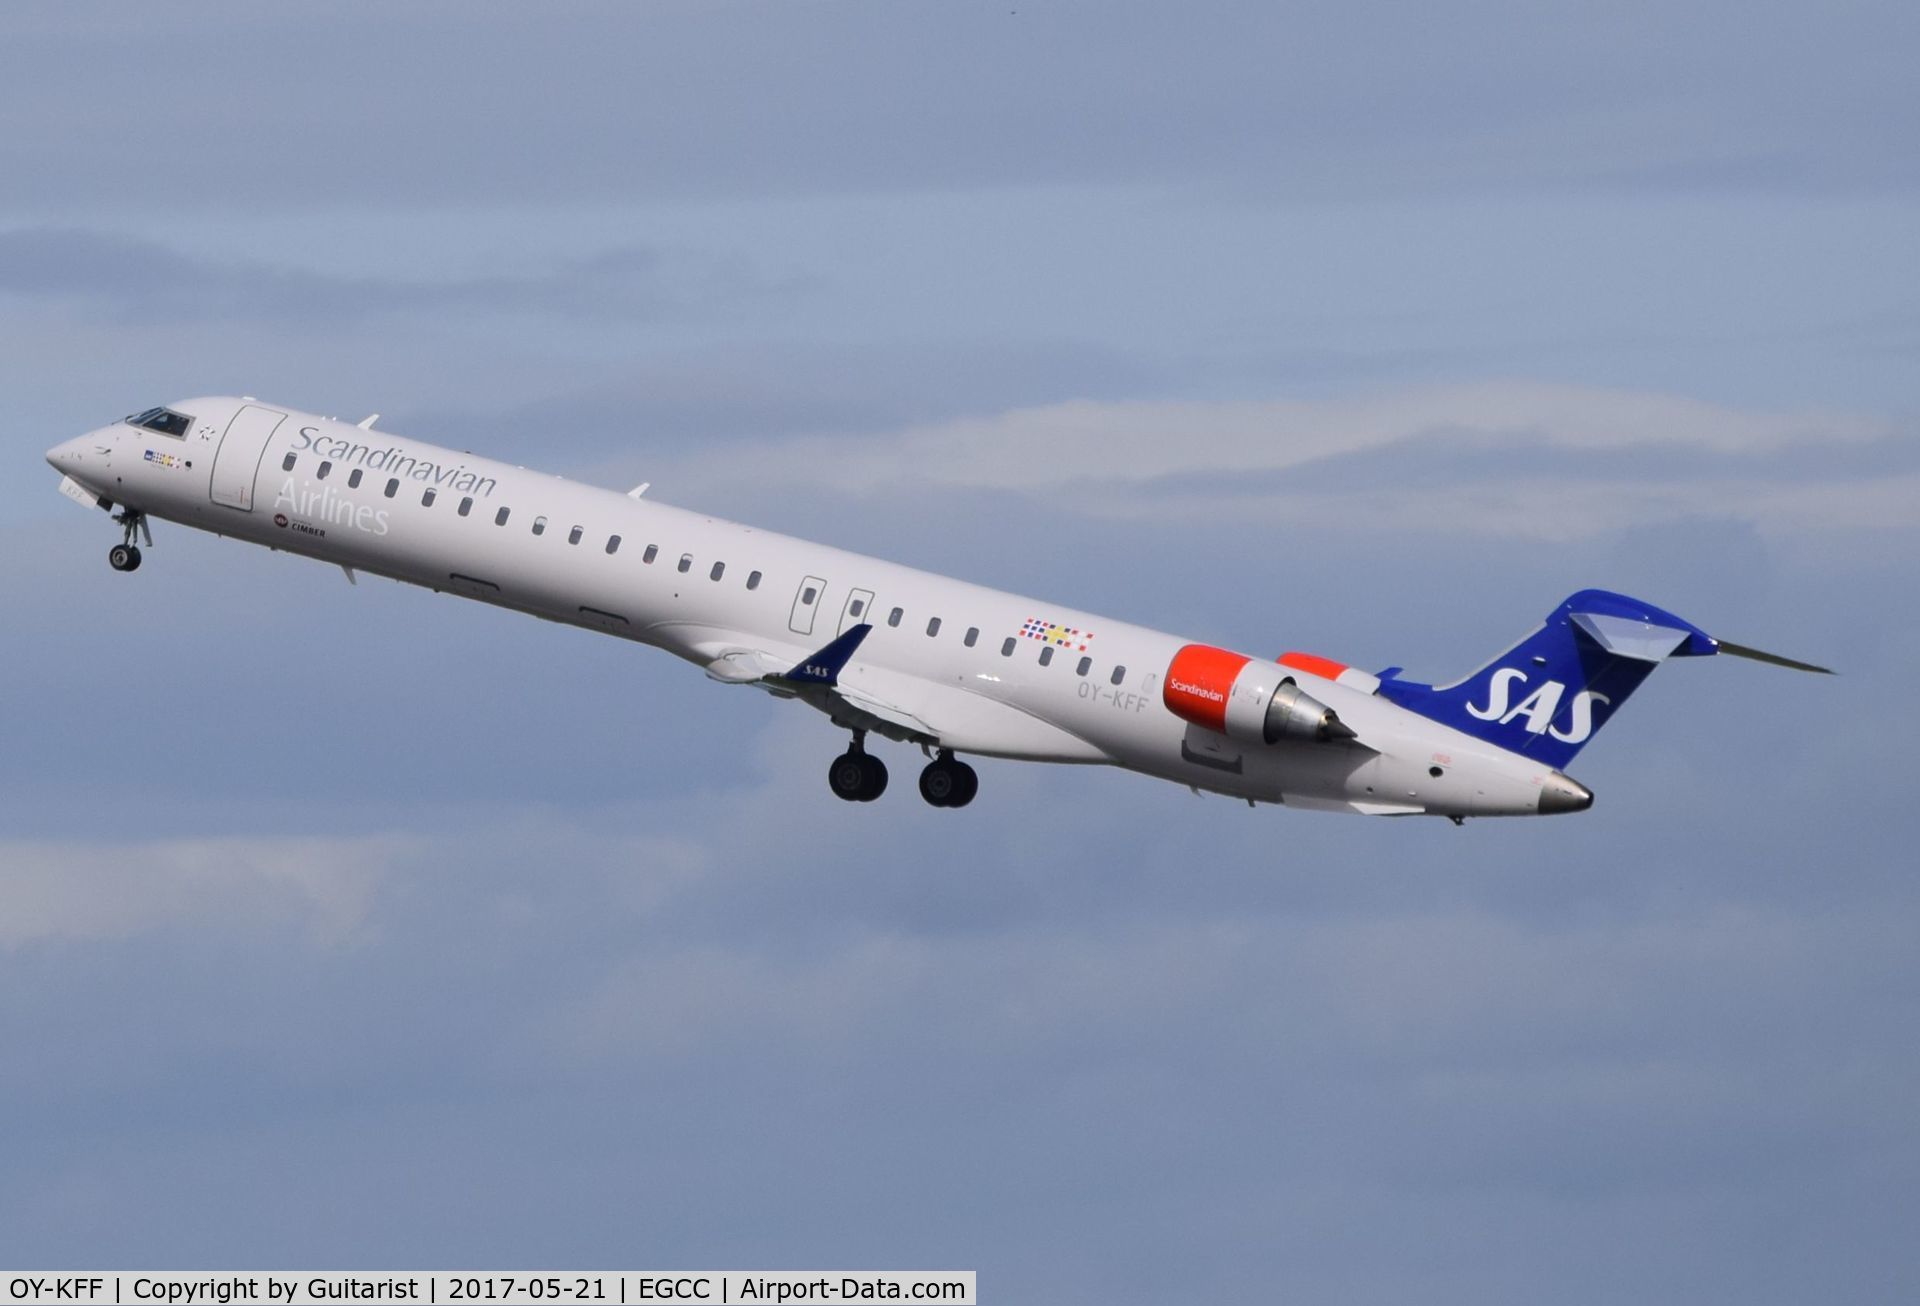 OY-KFF, 2009 Bombardier CRJ-900 (CL-600-2D24) C/N 15231, At Manchester